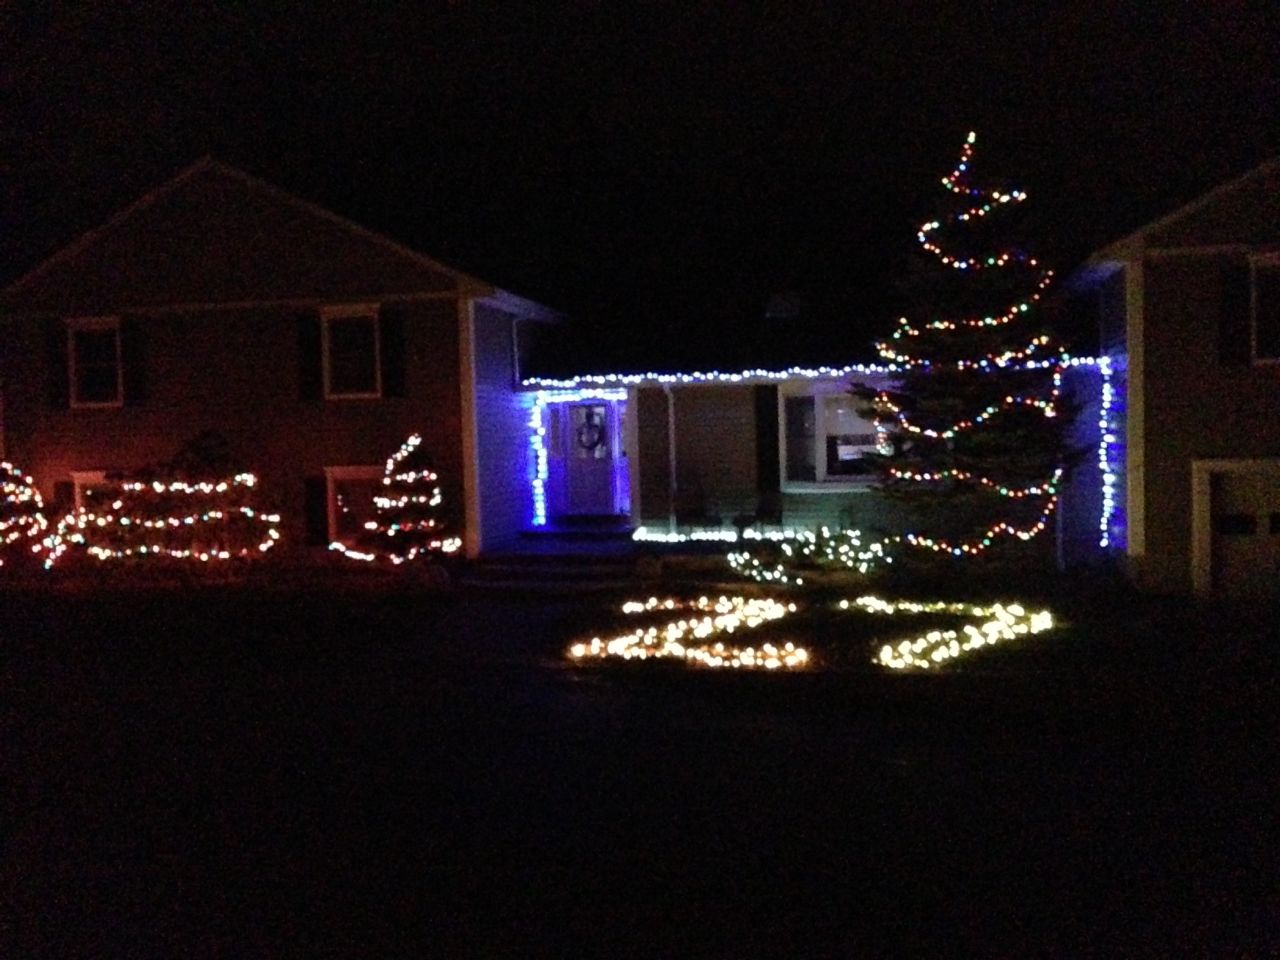 Ryan Emrich rearranged his house's Christmas lights to memorialize the 27 lives lost in Newtown. 